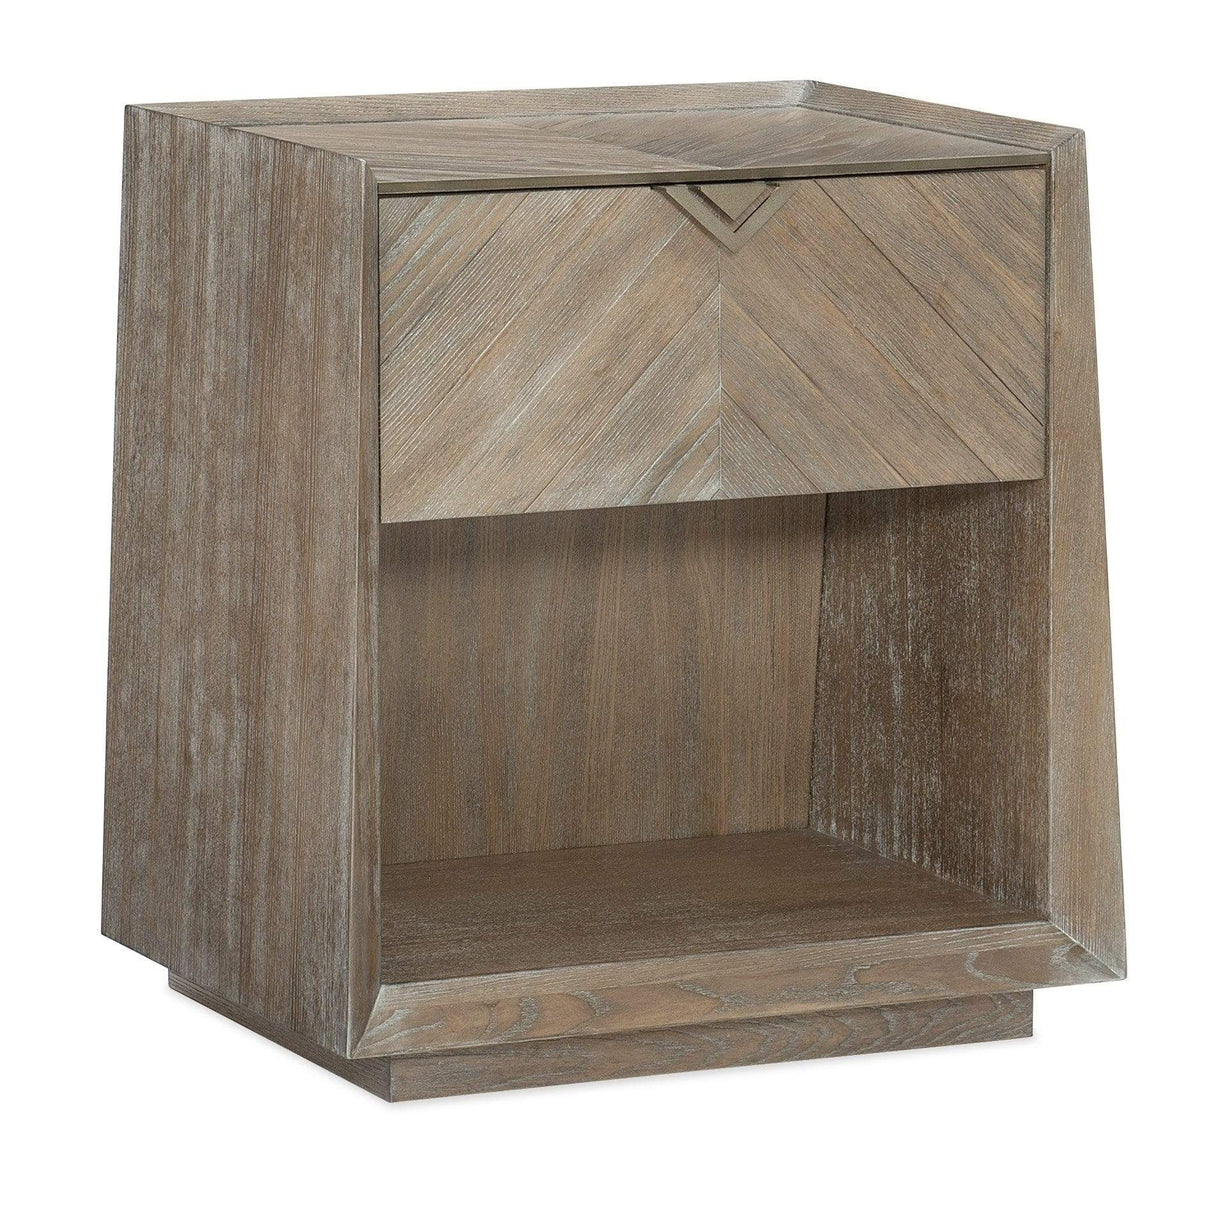 Caracole Earthly Delight Nightstand Furniture caracole-CLA-019-0614